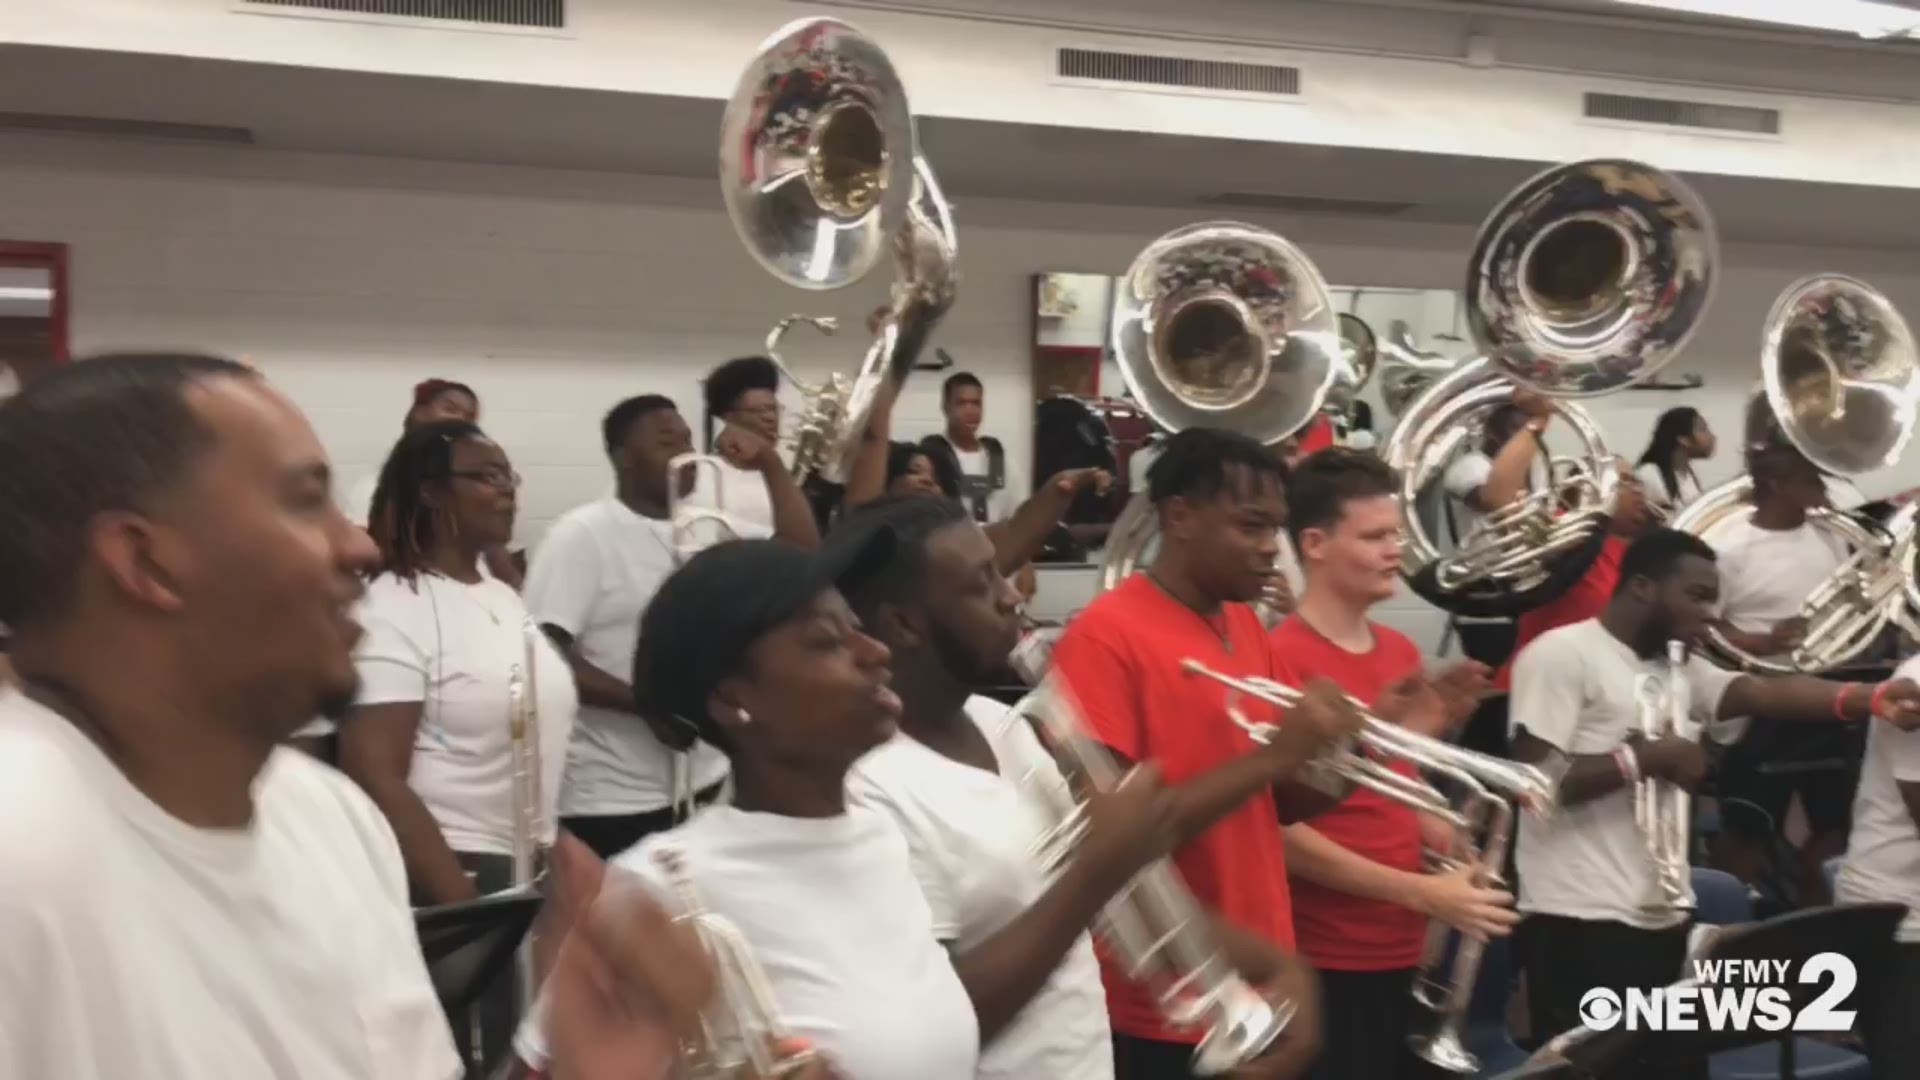 A sneak peek at WSSU?s Red Sea Of Sound during band camp, just days before their first performance.